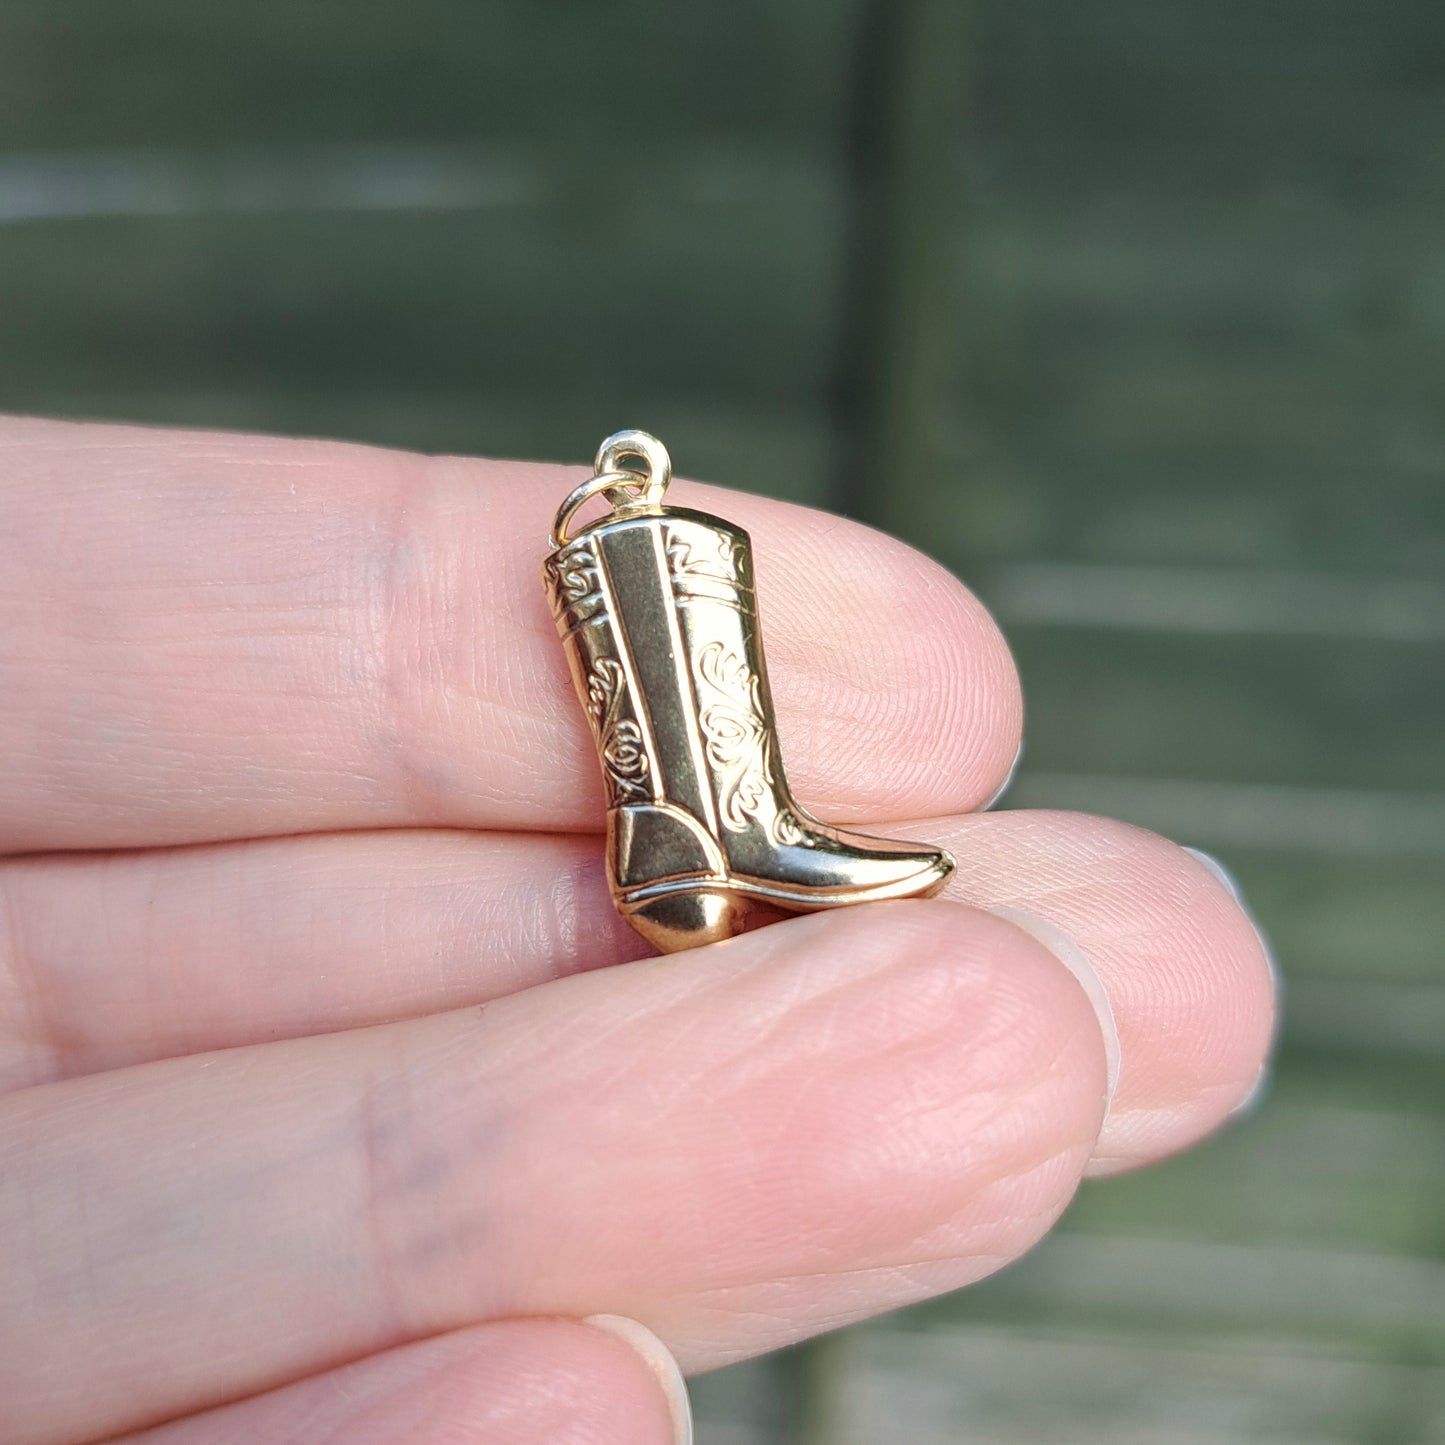 9ct Yellow Gold Cowboy Boot Charm